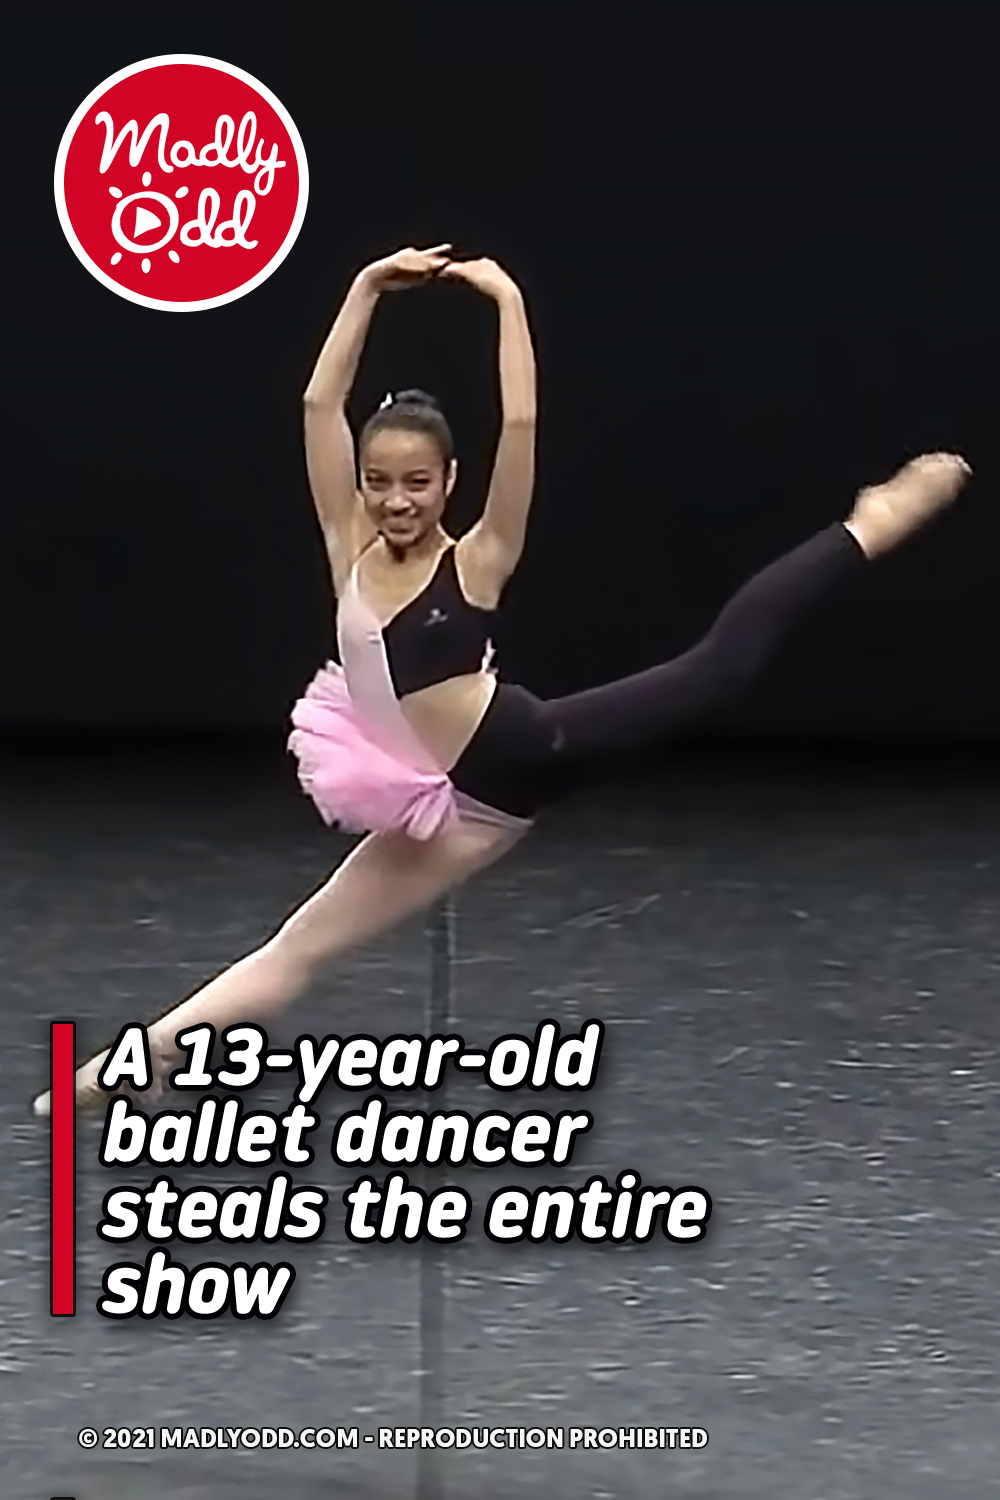 A 13-year-old ballet dancer steals the entire show